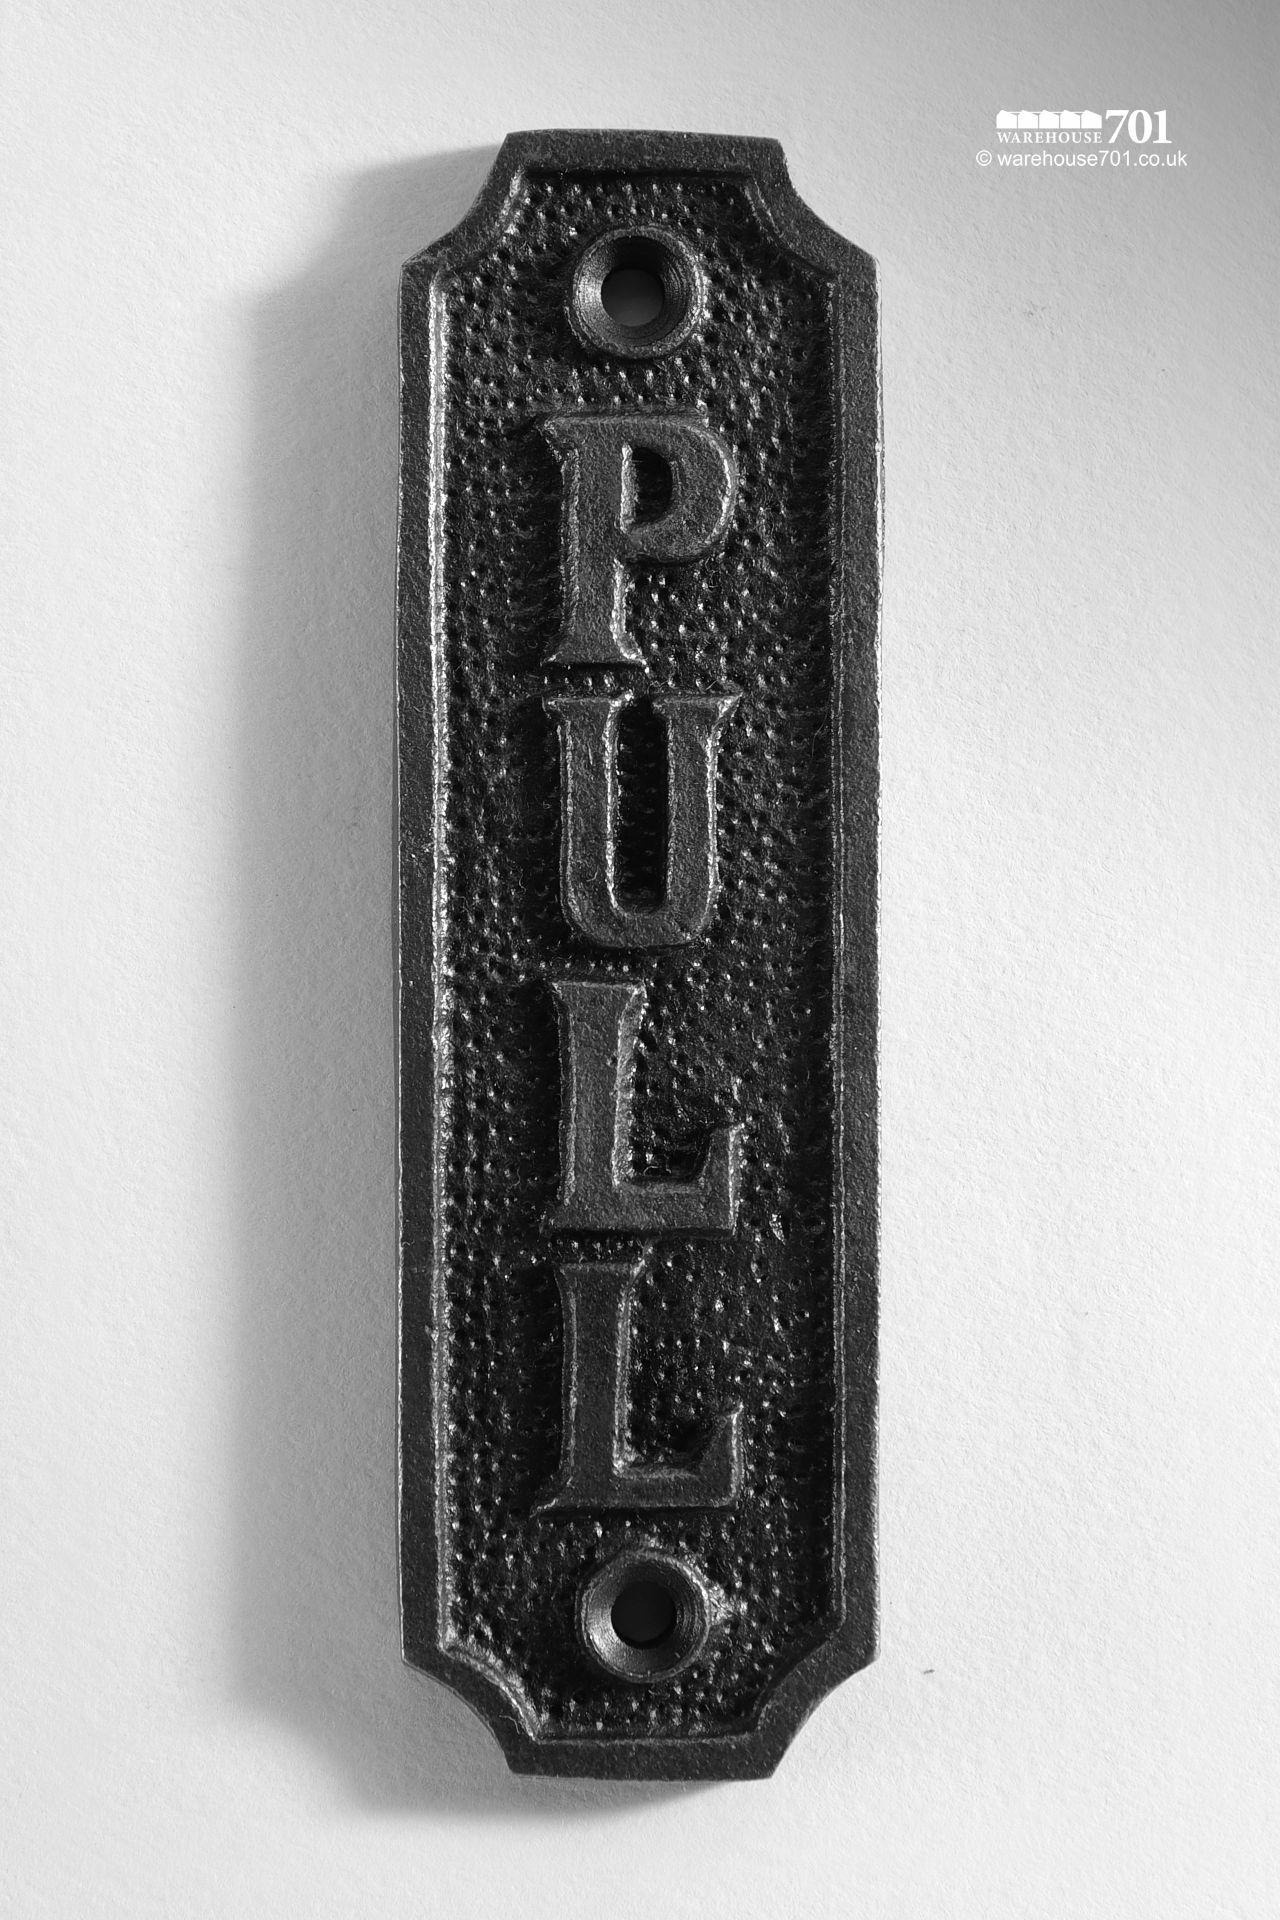 New Cast Iron Pull Sign